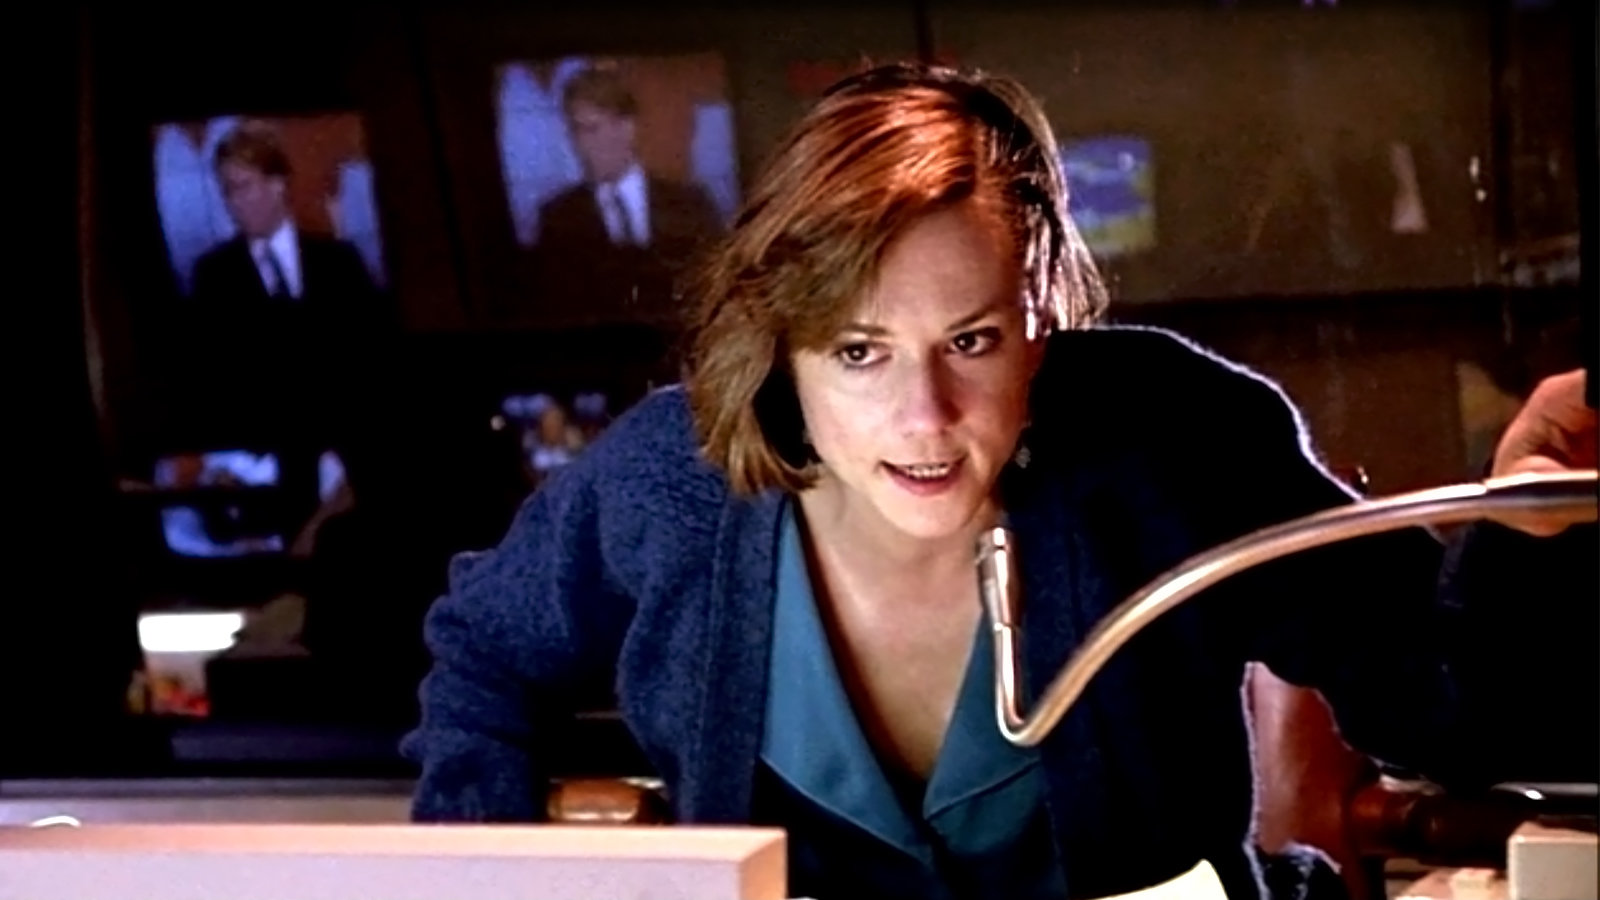 Why “Broadcast News” Is My Favorite Movie - The Feedback Society